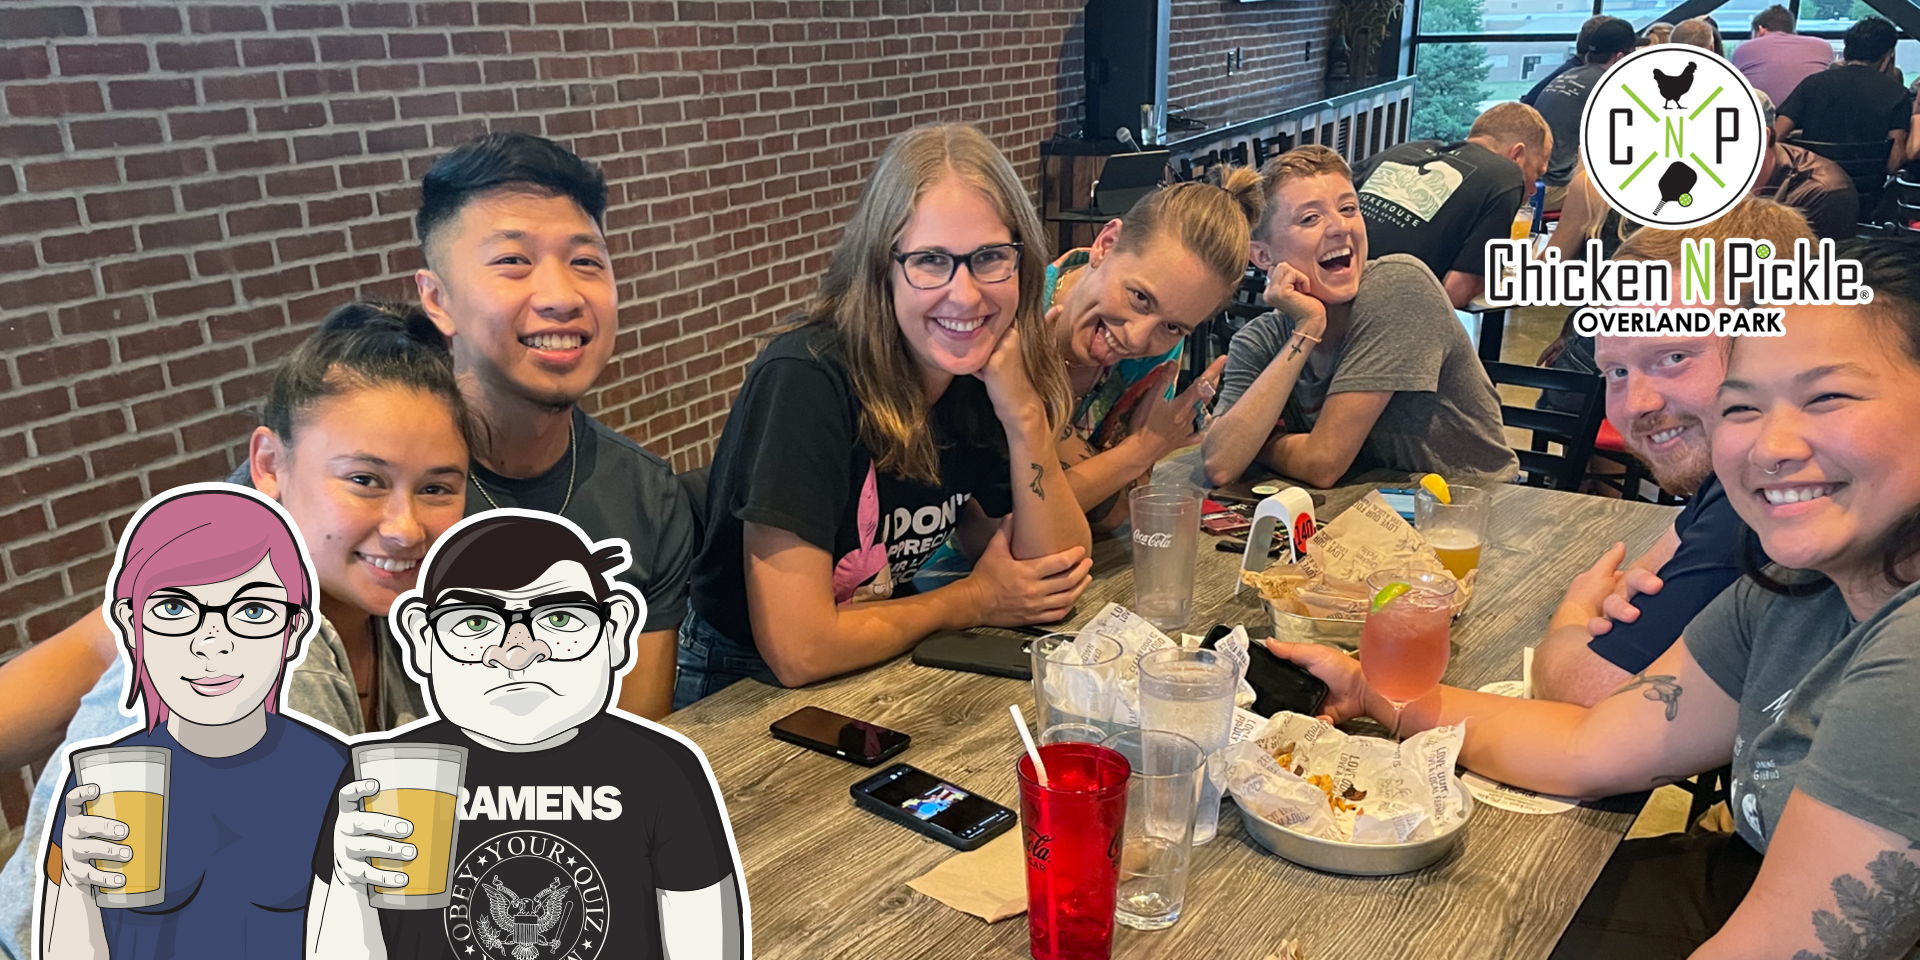 Geeks Who Drink Trivia Night at Chicken N Pickle - Overland Park promotional image